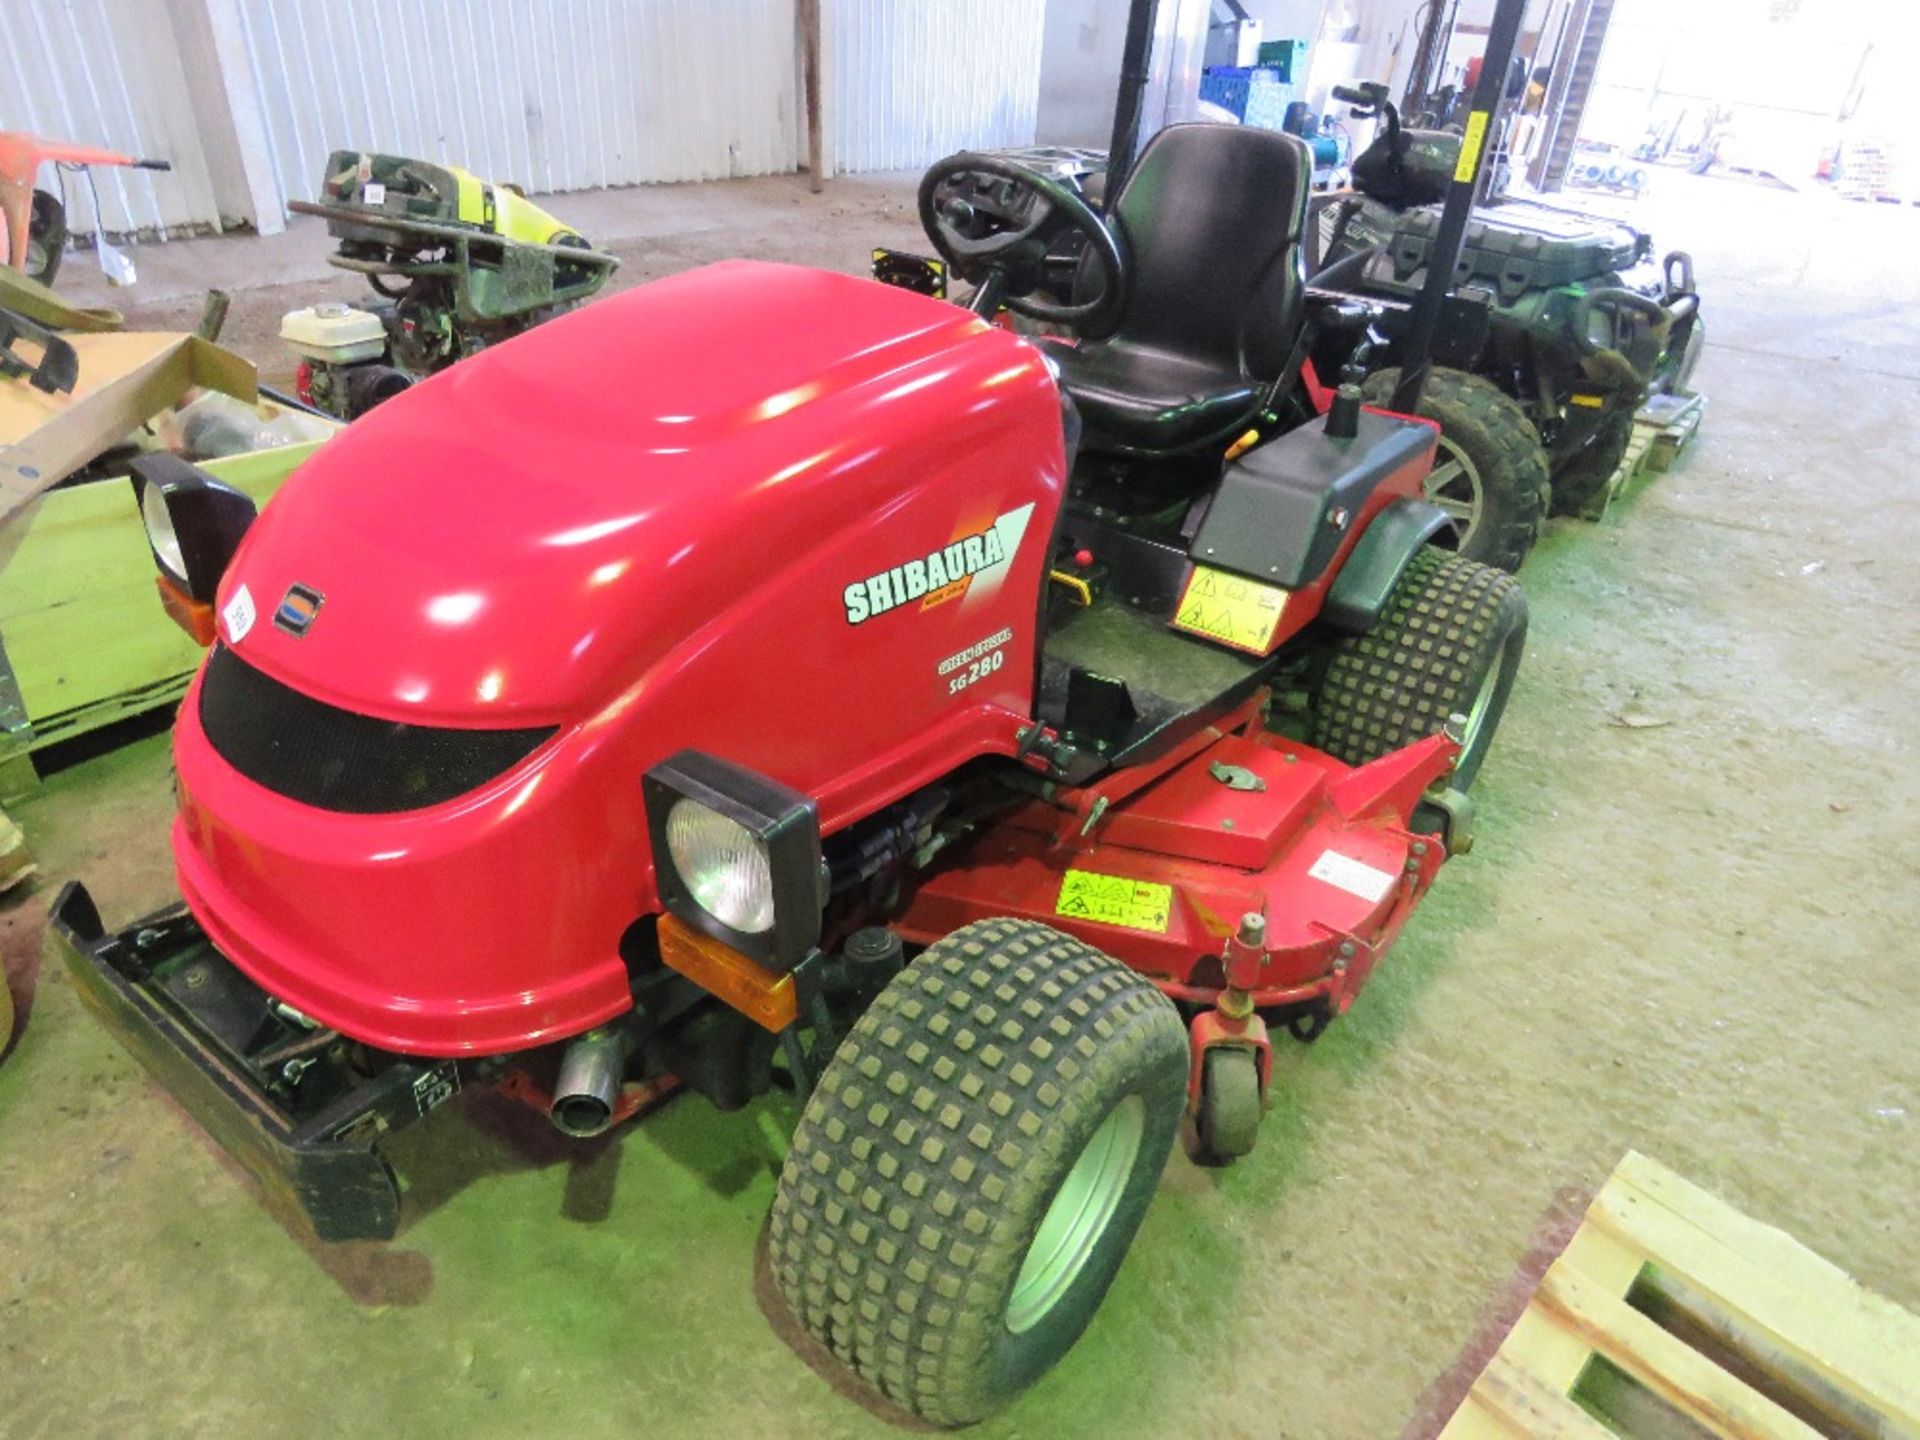 SHIBAURA SG280 GREEN SPECIAL RIDE ON MOWER WITH 5FT CUTTING DECK. 342 REC HOURS. REG:NK18 BJO WITH V - Image 2 of 9